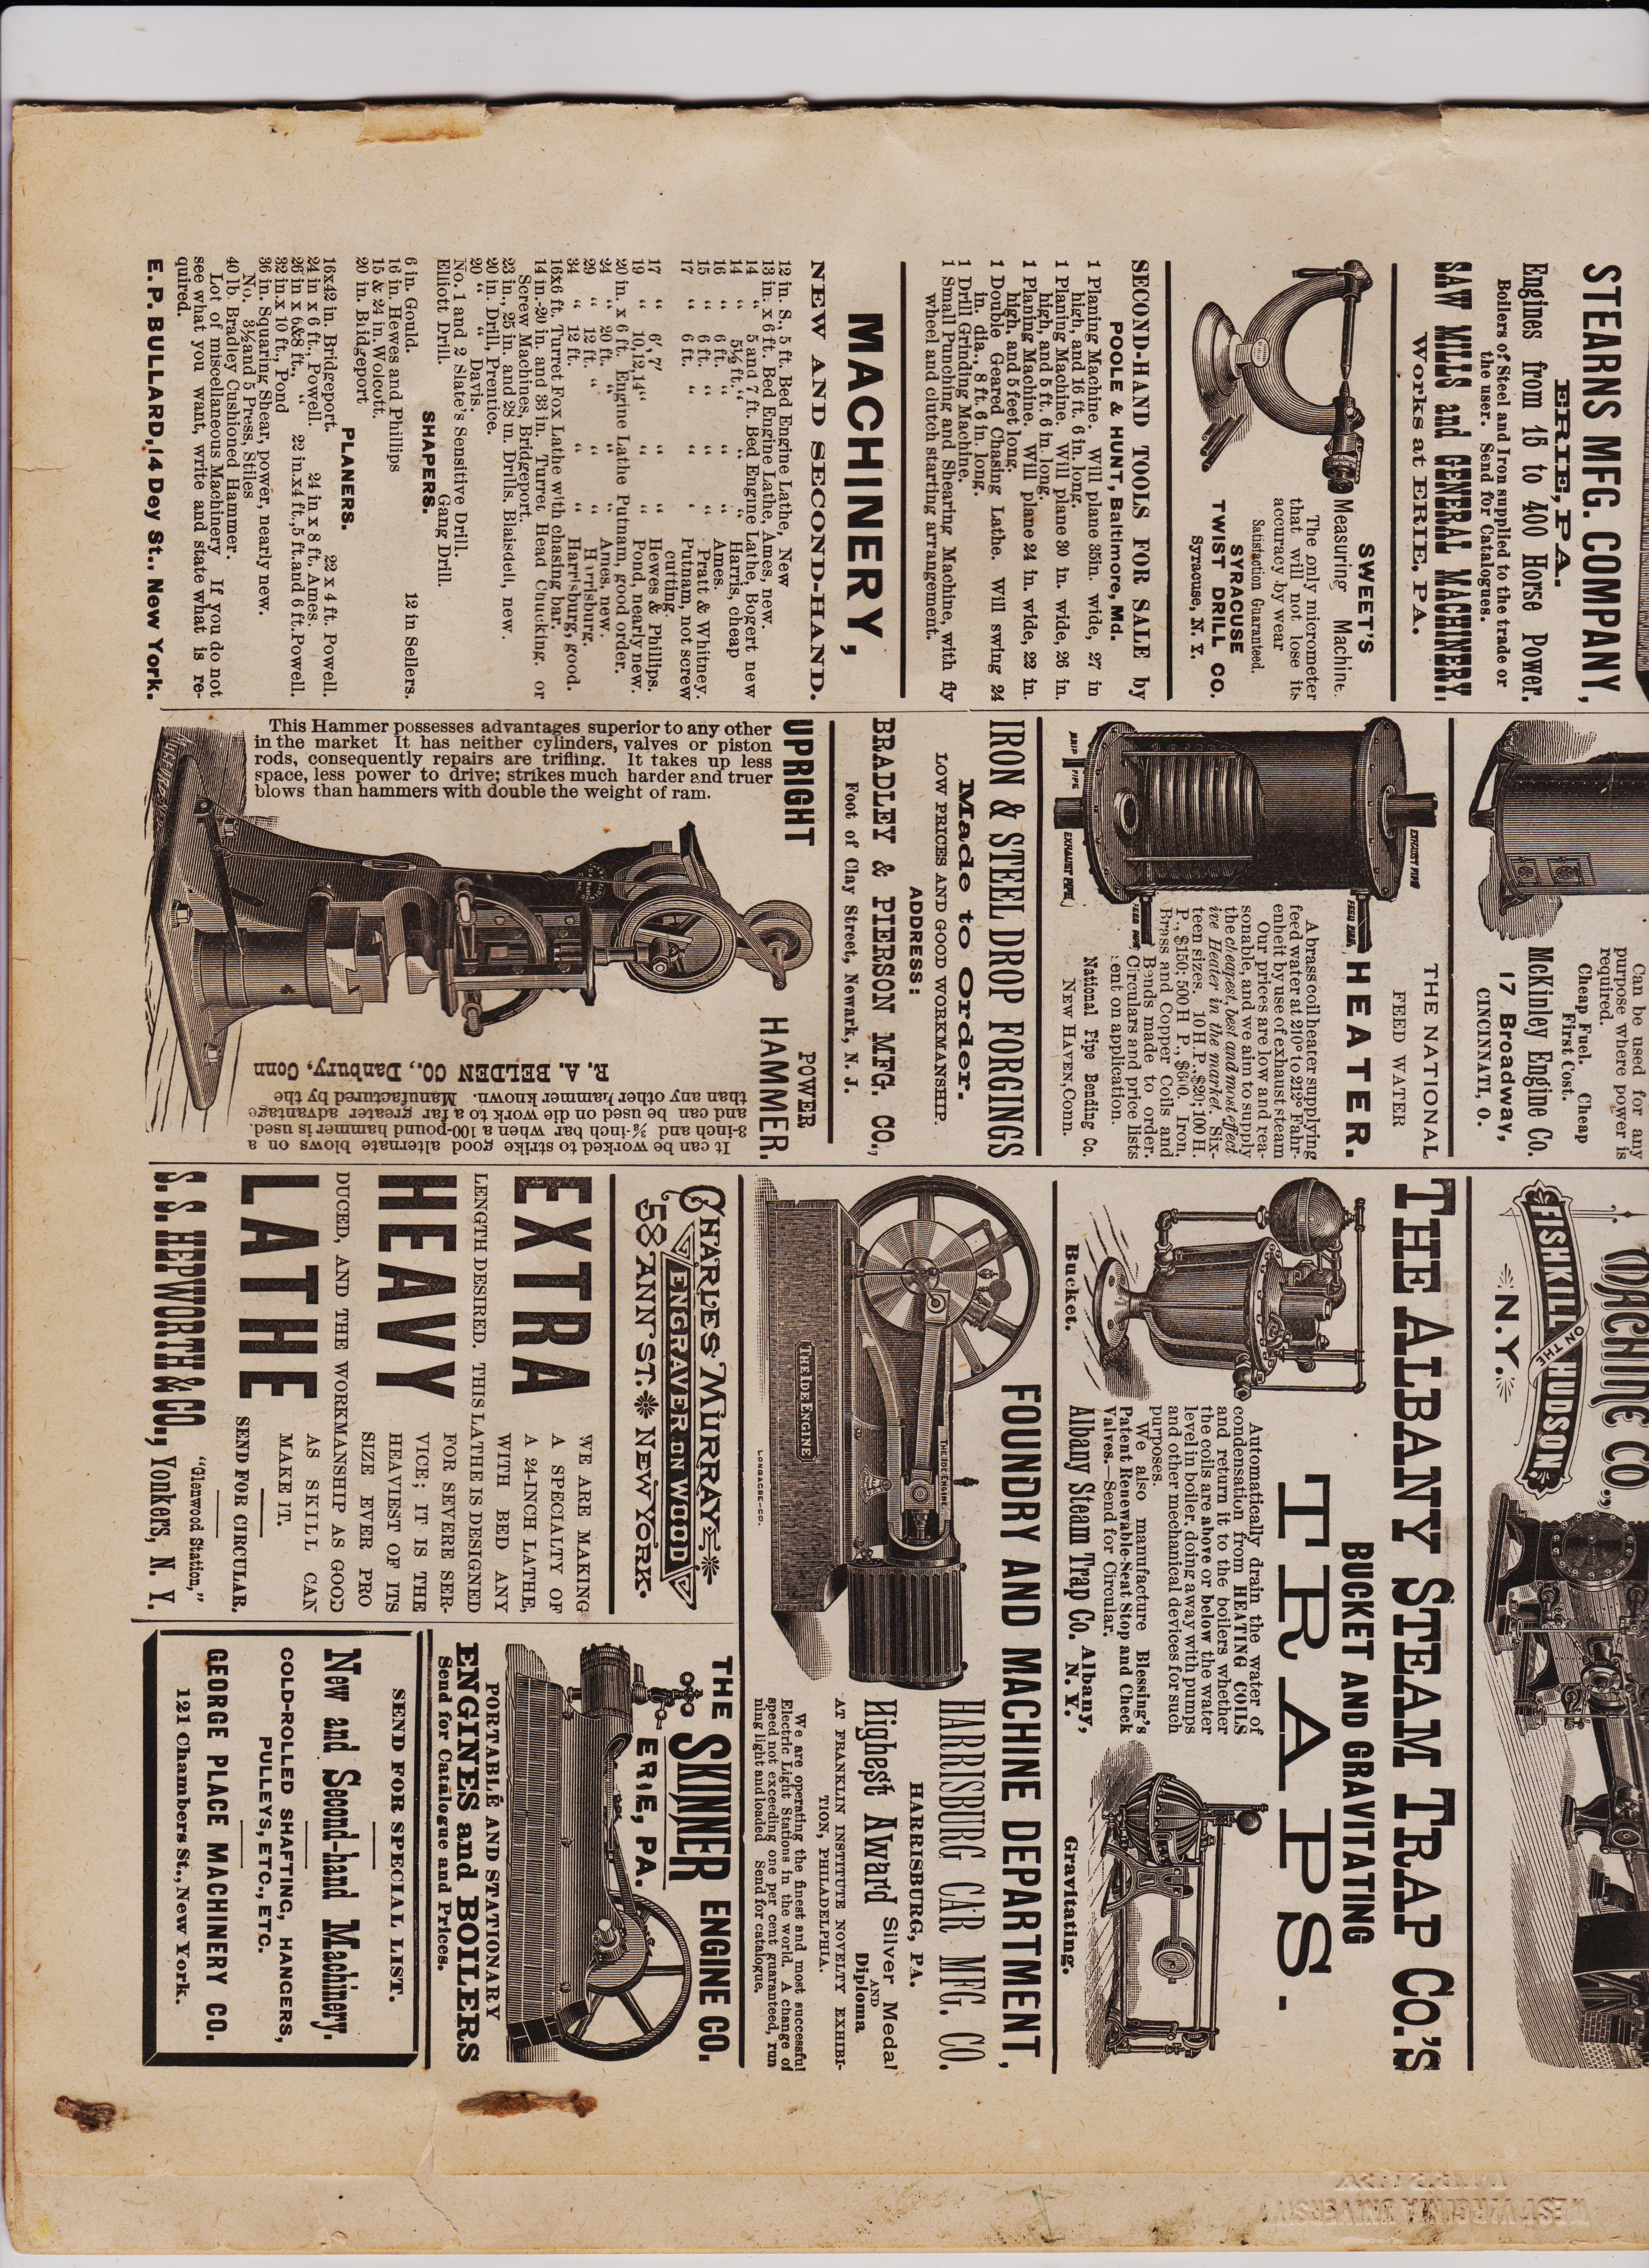 https://antiquemachinery.com/images-American-Machinist-Jan-15-1887/American-Machinist-Jan-15-1887-pg-15-bot-Power-Hammer-R-A-Beldon-upright-Skinner-Foundry-and-Machine-Harrisburg-Bradley-and-Pieson-mfg-co-sweets-measuring-machine-Syacues-twist-drill.jpeg